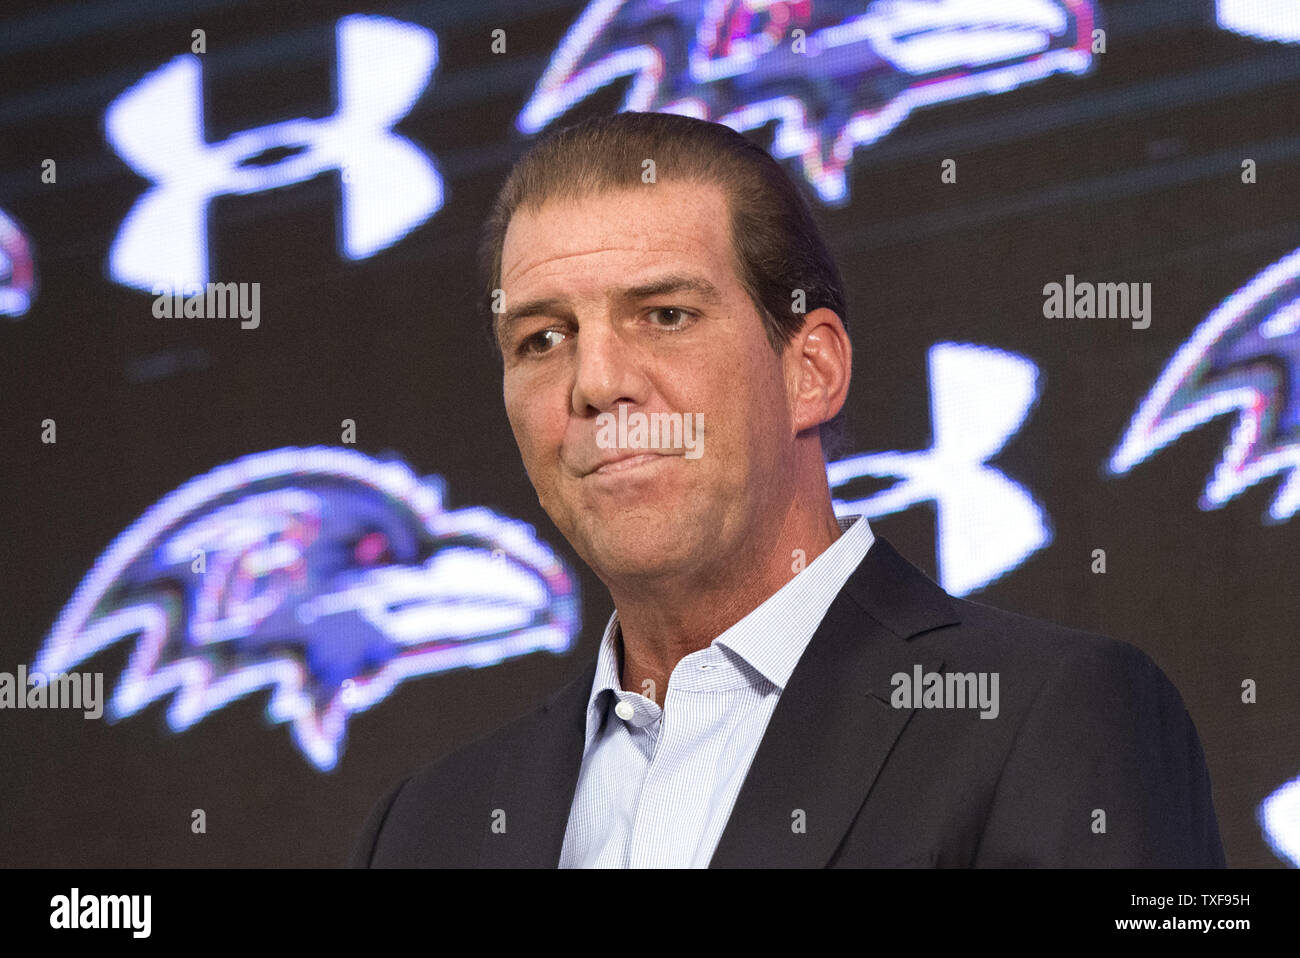 Baltimore Ravens owner Steve Bisciotti speaks to the press about the recent release of Ray Rice and the team's knowledge of Rice's physical altercation with his then-fiancee, at the Raven's practice facility in Owens Mills, Maryland on September 22, 2014. Rice was captured on video physically abusing his fiancé in February.   UPI/Kevin Dietsch Stock Photo